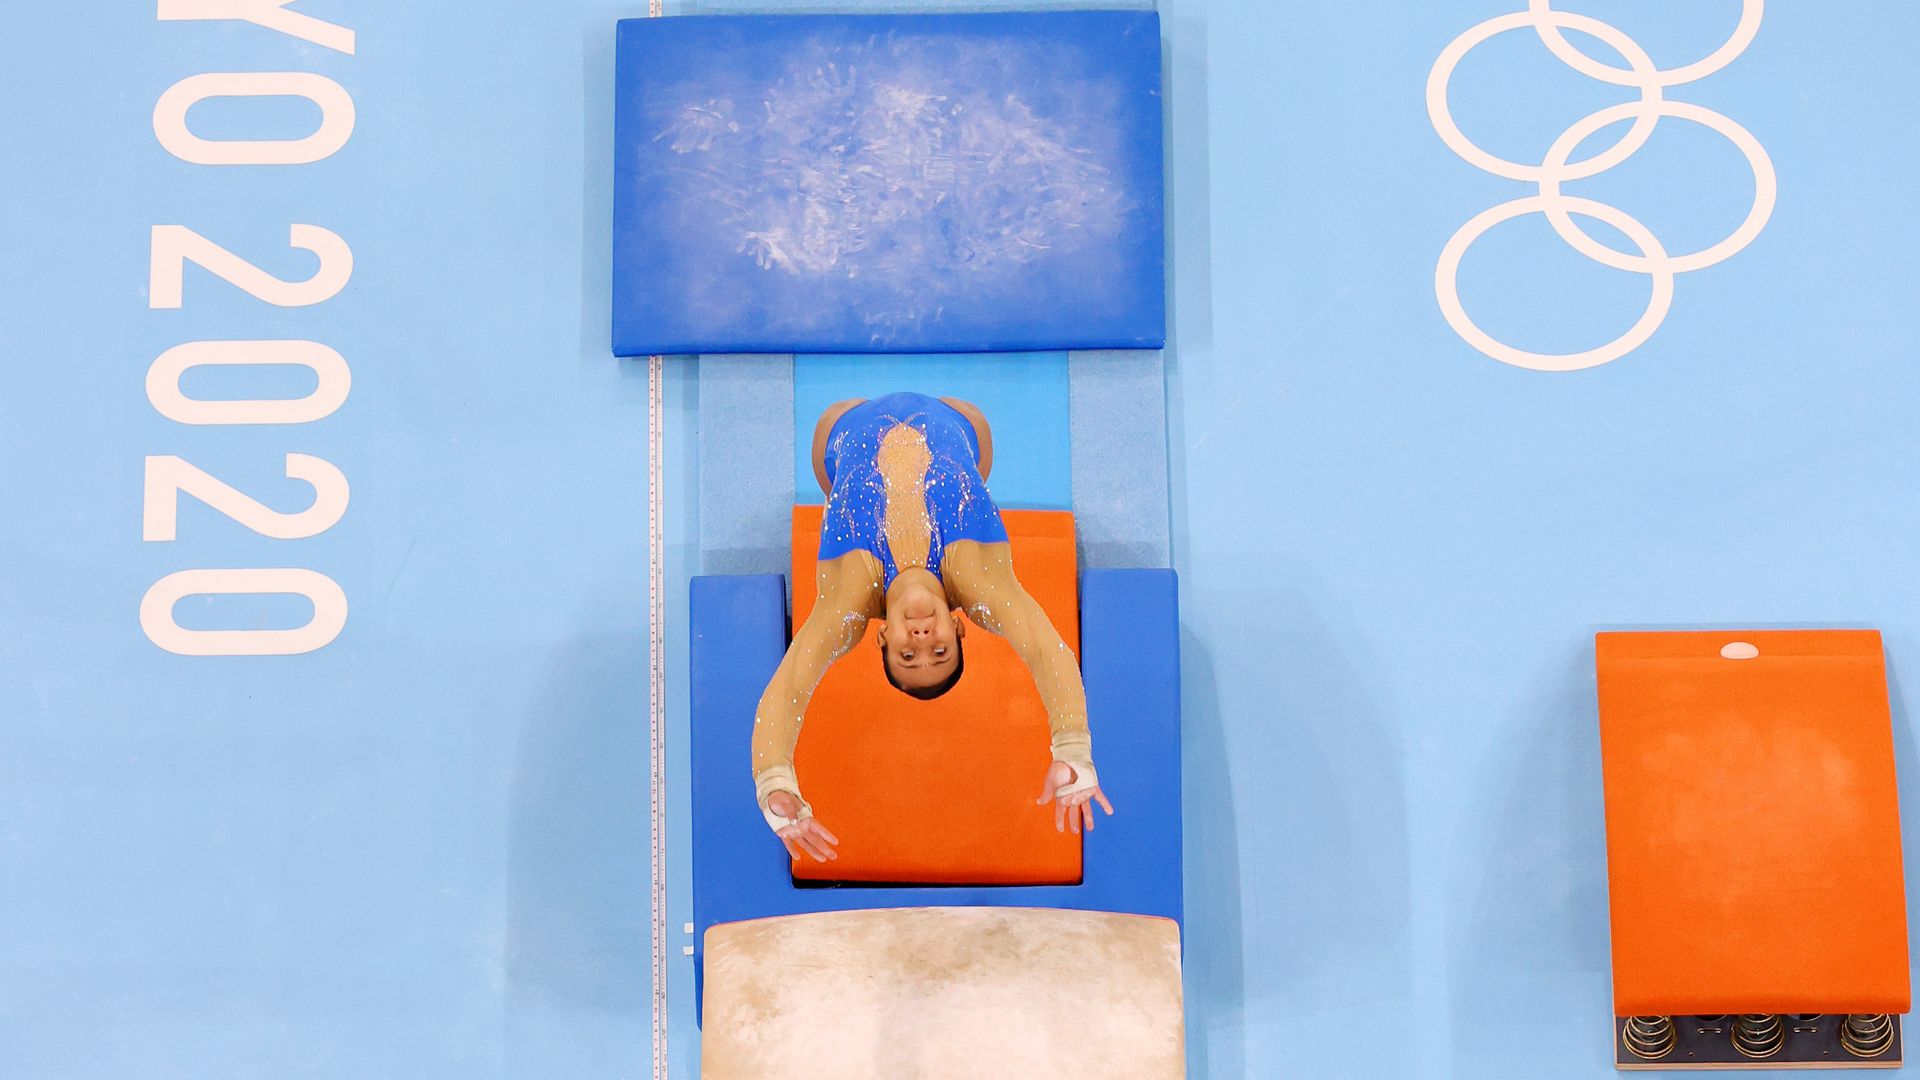 Photo of Luciana Alvarado competing on the vault at the Tokyo Olympics